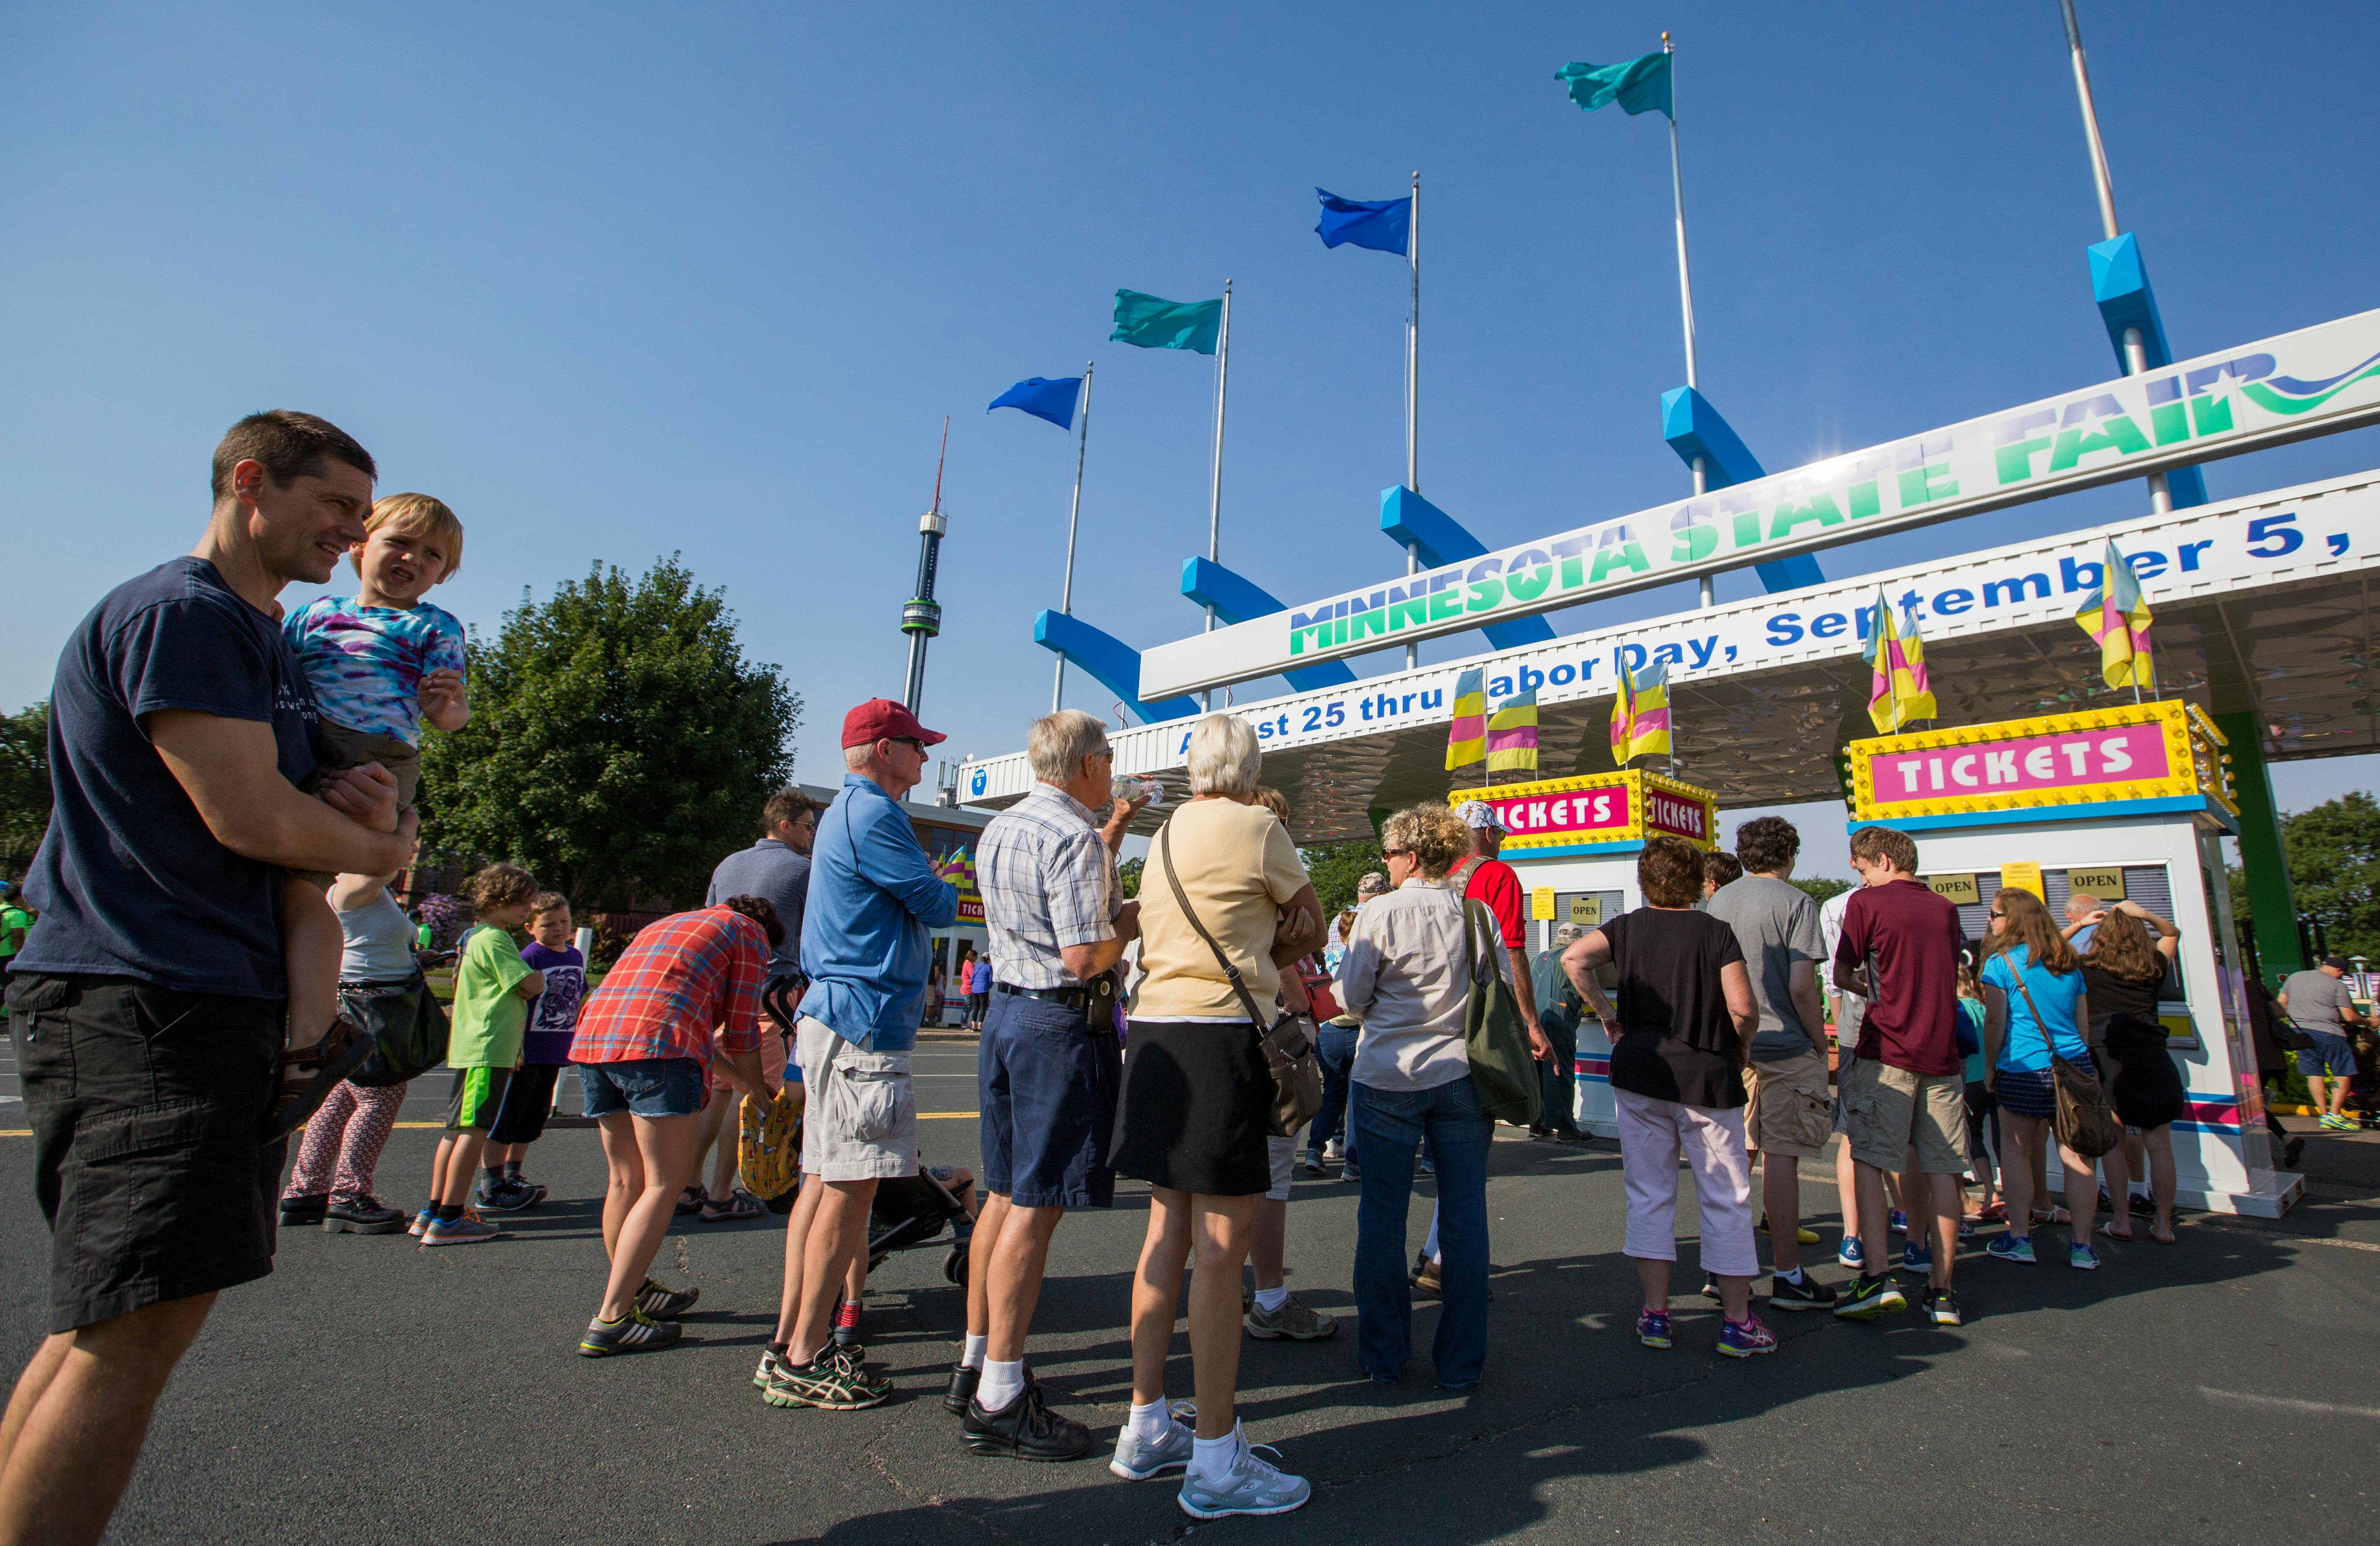 Minnesota State Fair Schedule 2022 2022 Minnesota State Fair Will Have Higher Admission Prices, Shorter Hours  | Star Tribune